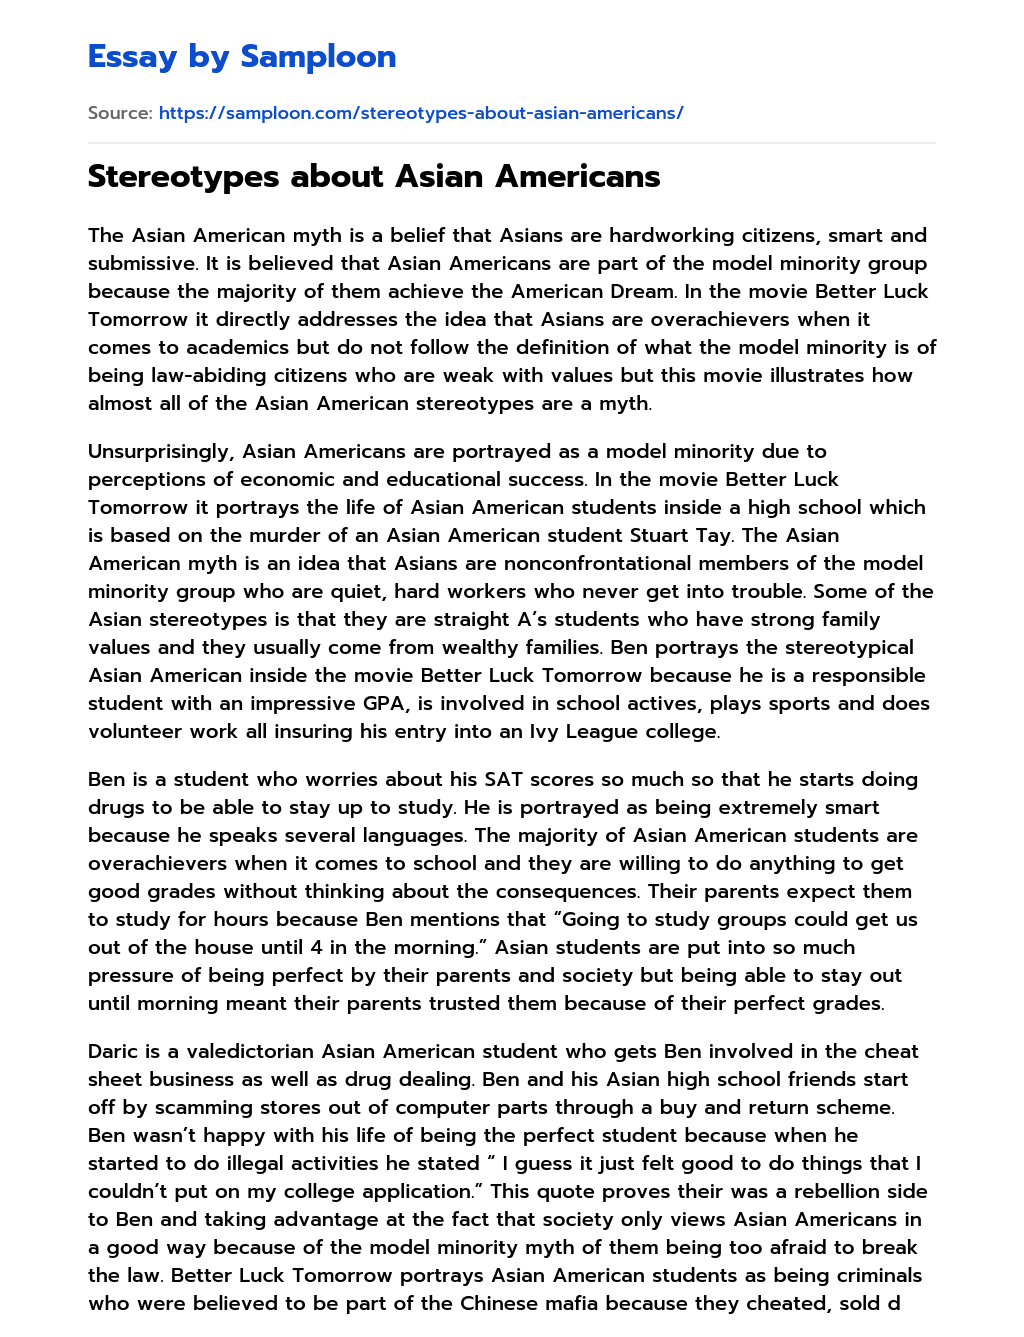 Stereotypes about Asian Americans essay